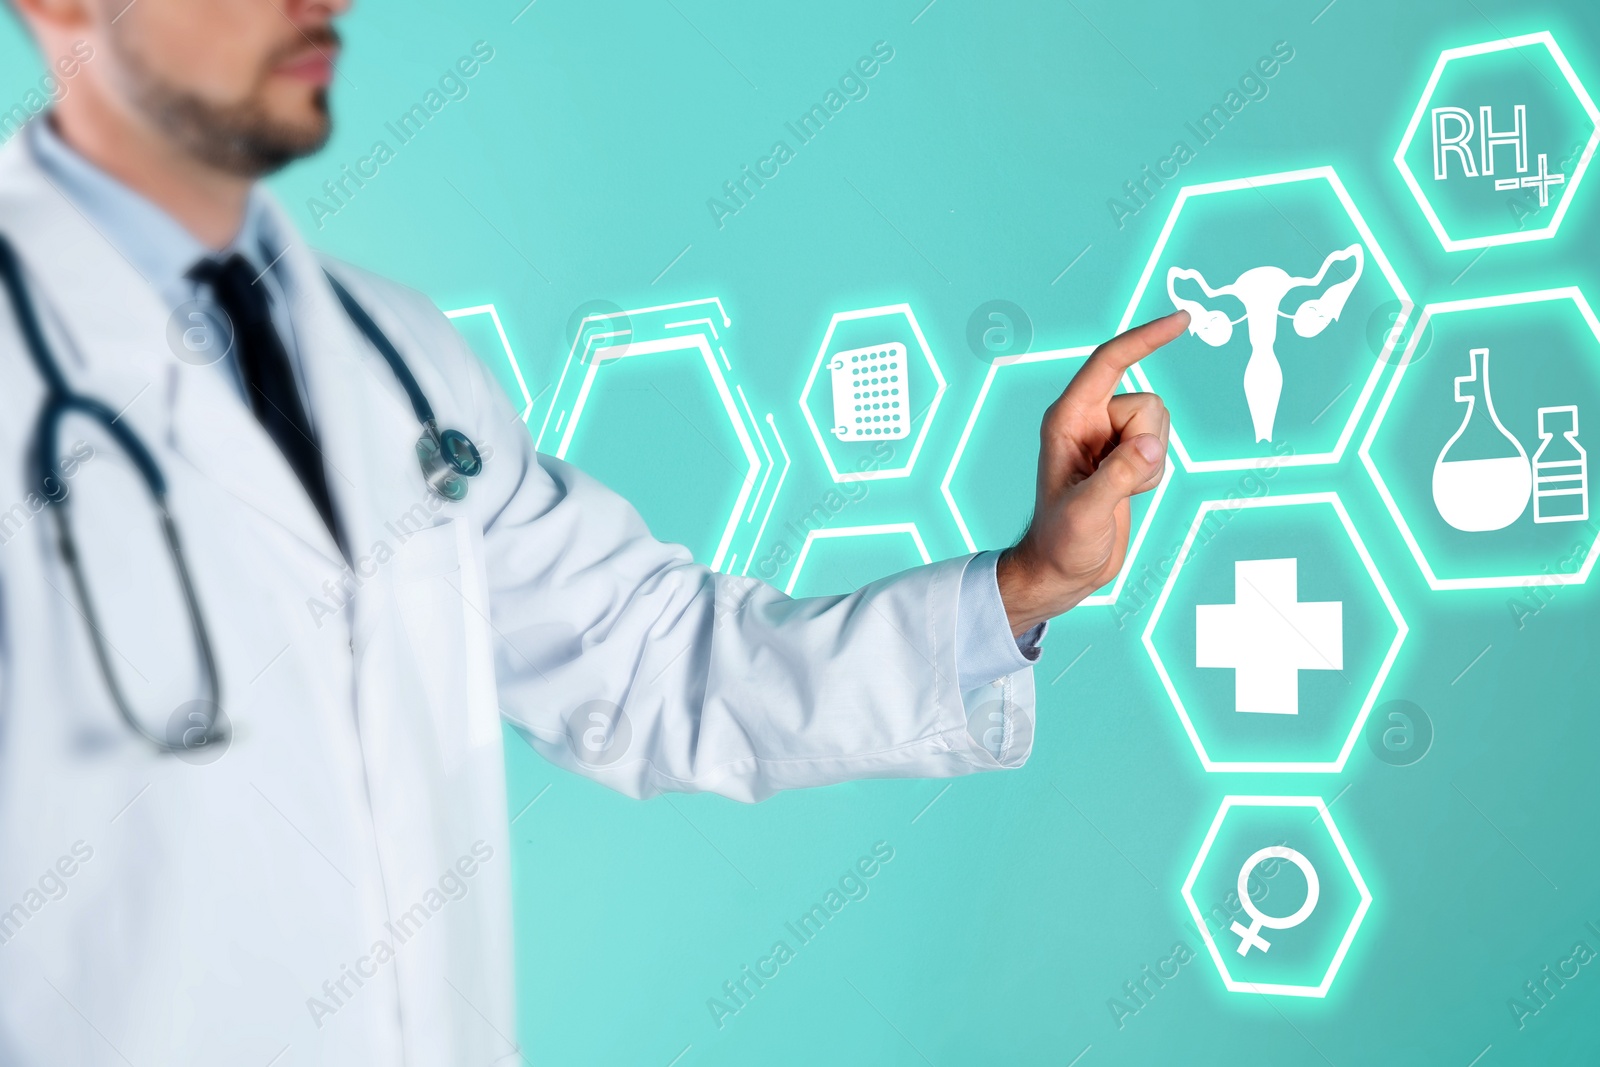 Image of Menopause concept. Doctor touching uterus icon on digital screen against turquoise background, closeup